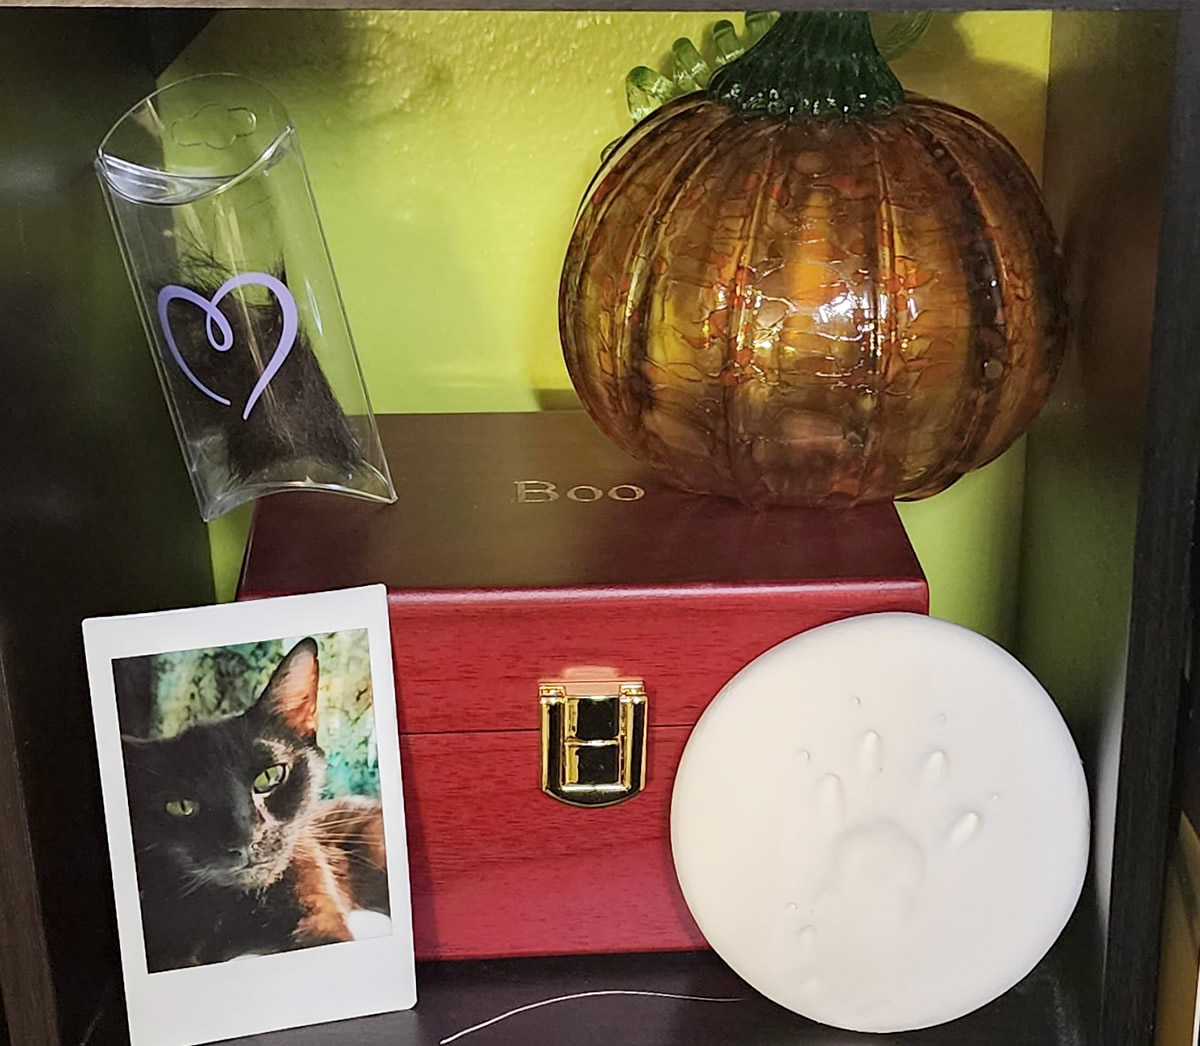 A small shelf with a collection of memorial items including a wooden box of ashes with the name Boo engraved on the top, a pretty orange glass pumpkin with a curly green stem, an imprint of a cat paw, a printed photo of a black cat, a shed white whisker, and a clipping of soft black fur in plastic container.